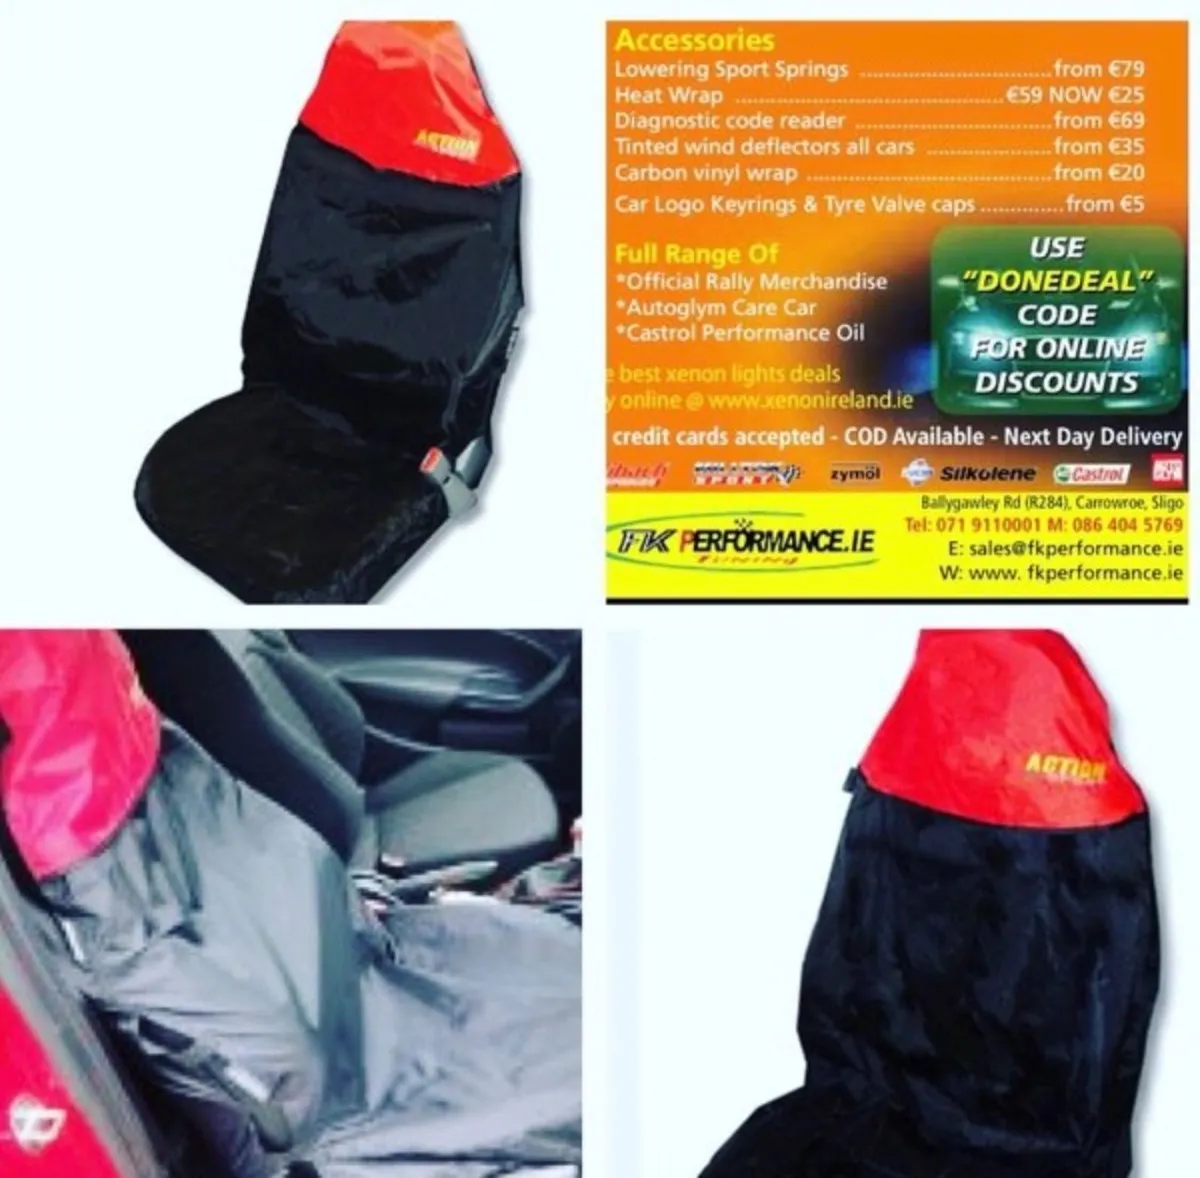 Action sport seat covers offer